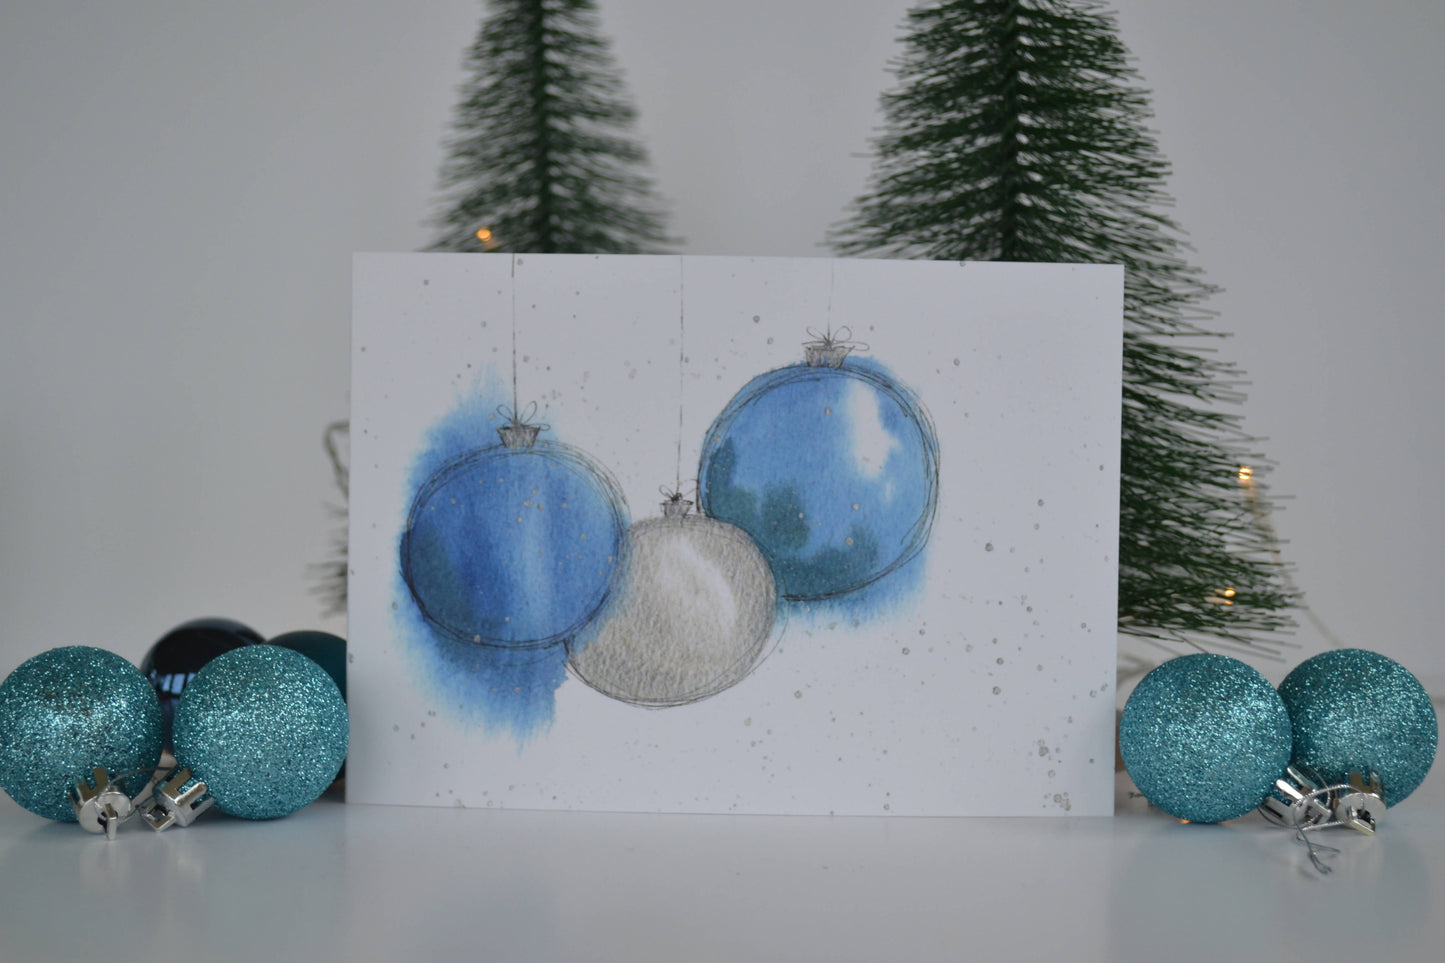 Baubles Charity Christmas Cards - Pack of 5